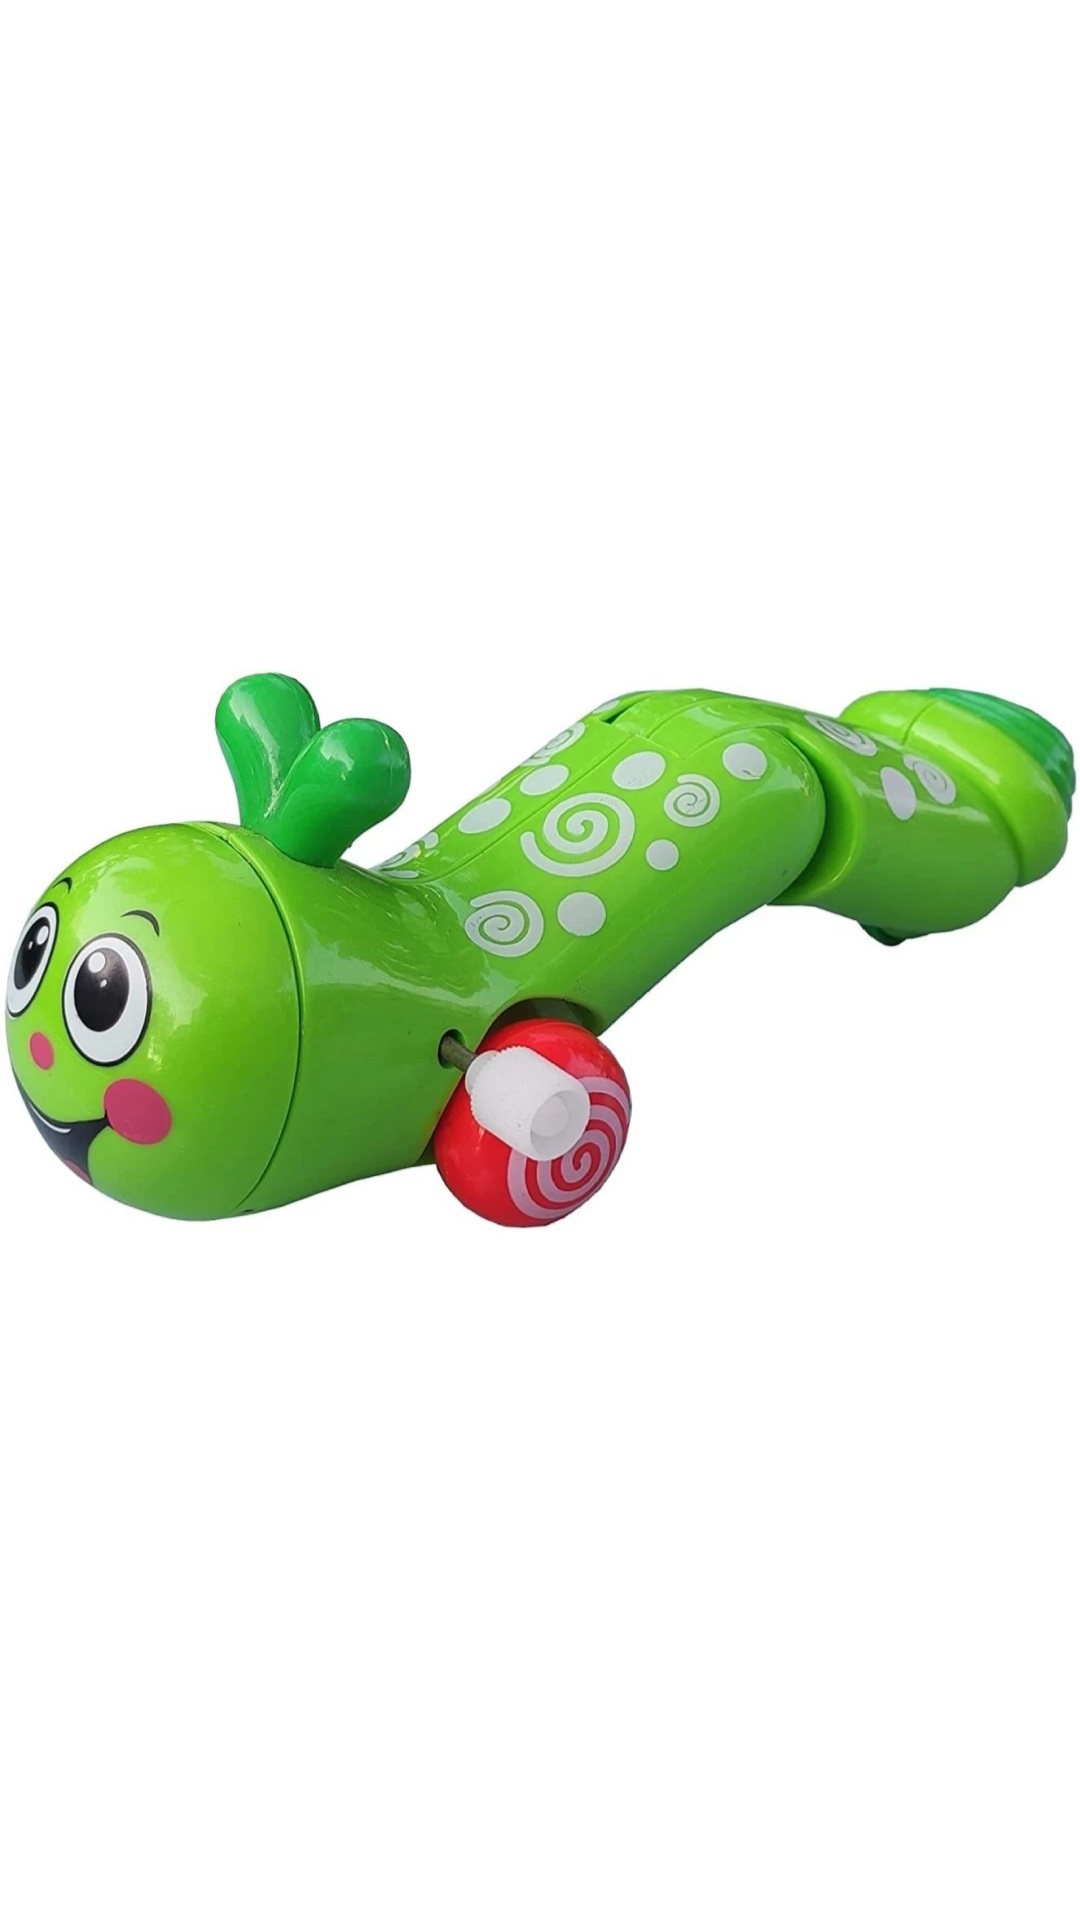 Twisty caterpillar rattle toy with crawl action